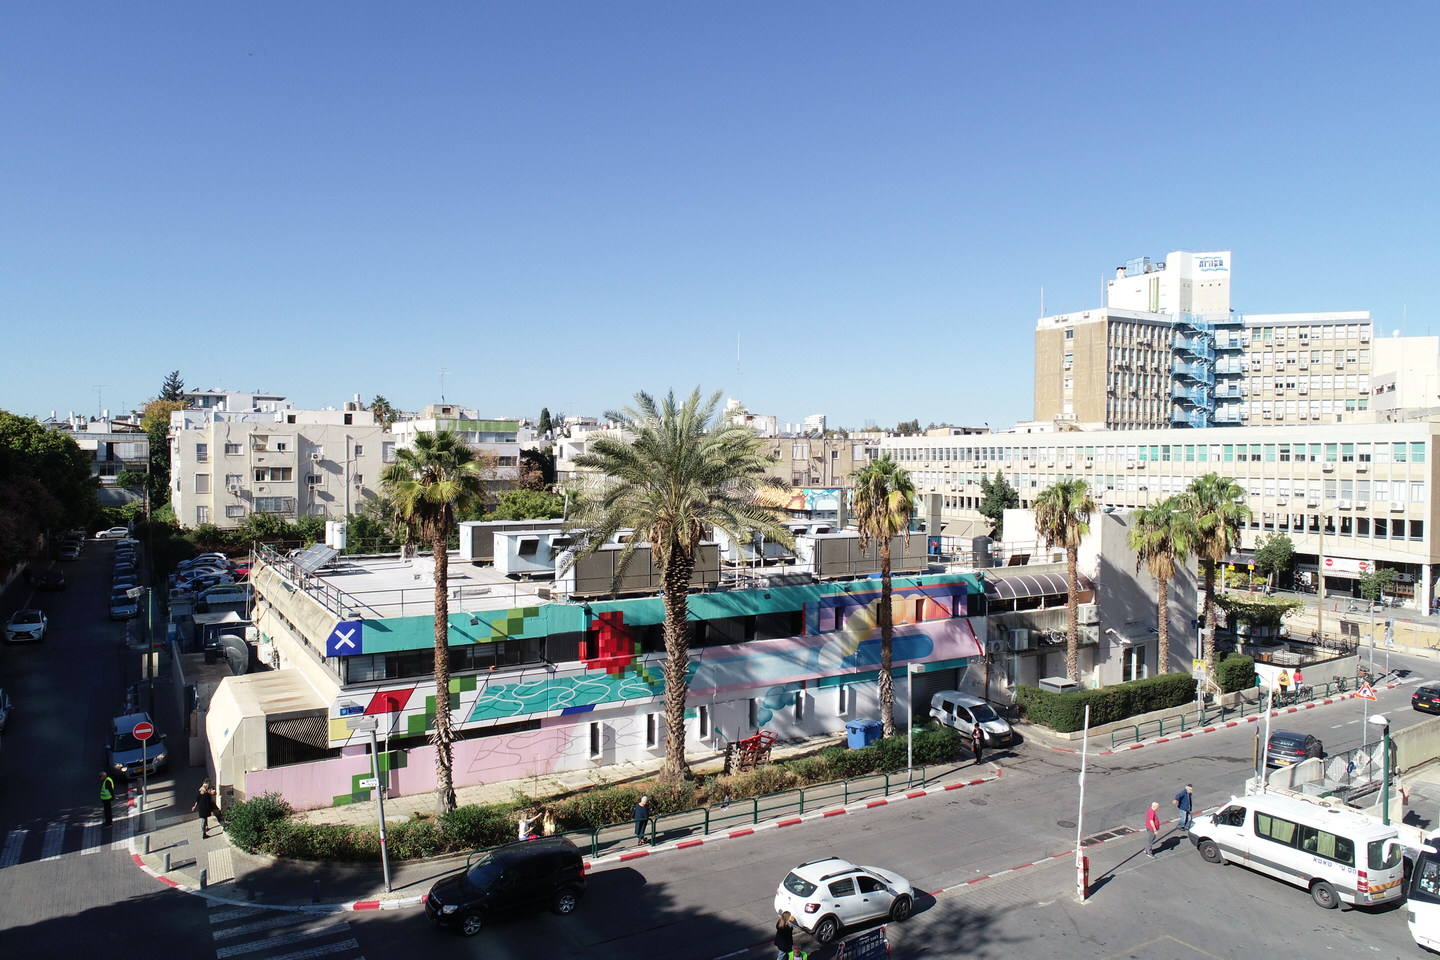 Lincoln 16: A value-add project at the intersection of Lincoln, Saadia Gaon, and Lloyd George Streets in Tel Aviv. Serves as a home for NPOs, and social organizations supporting the community | Reality the Leading Group of Real Estate Investment Funds in Israel